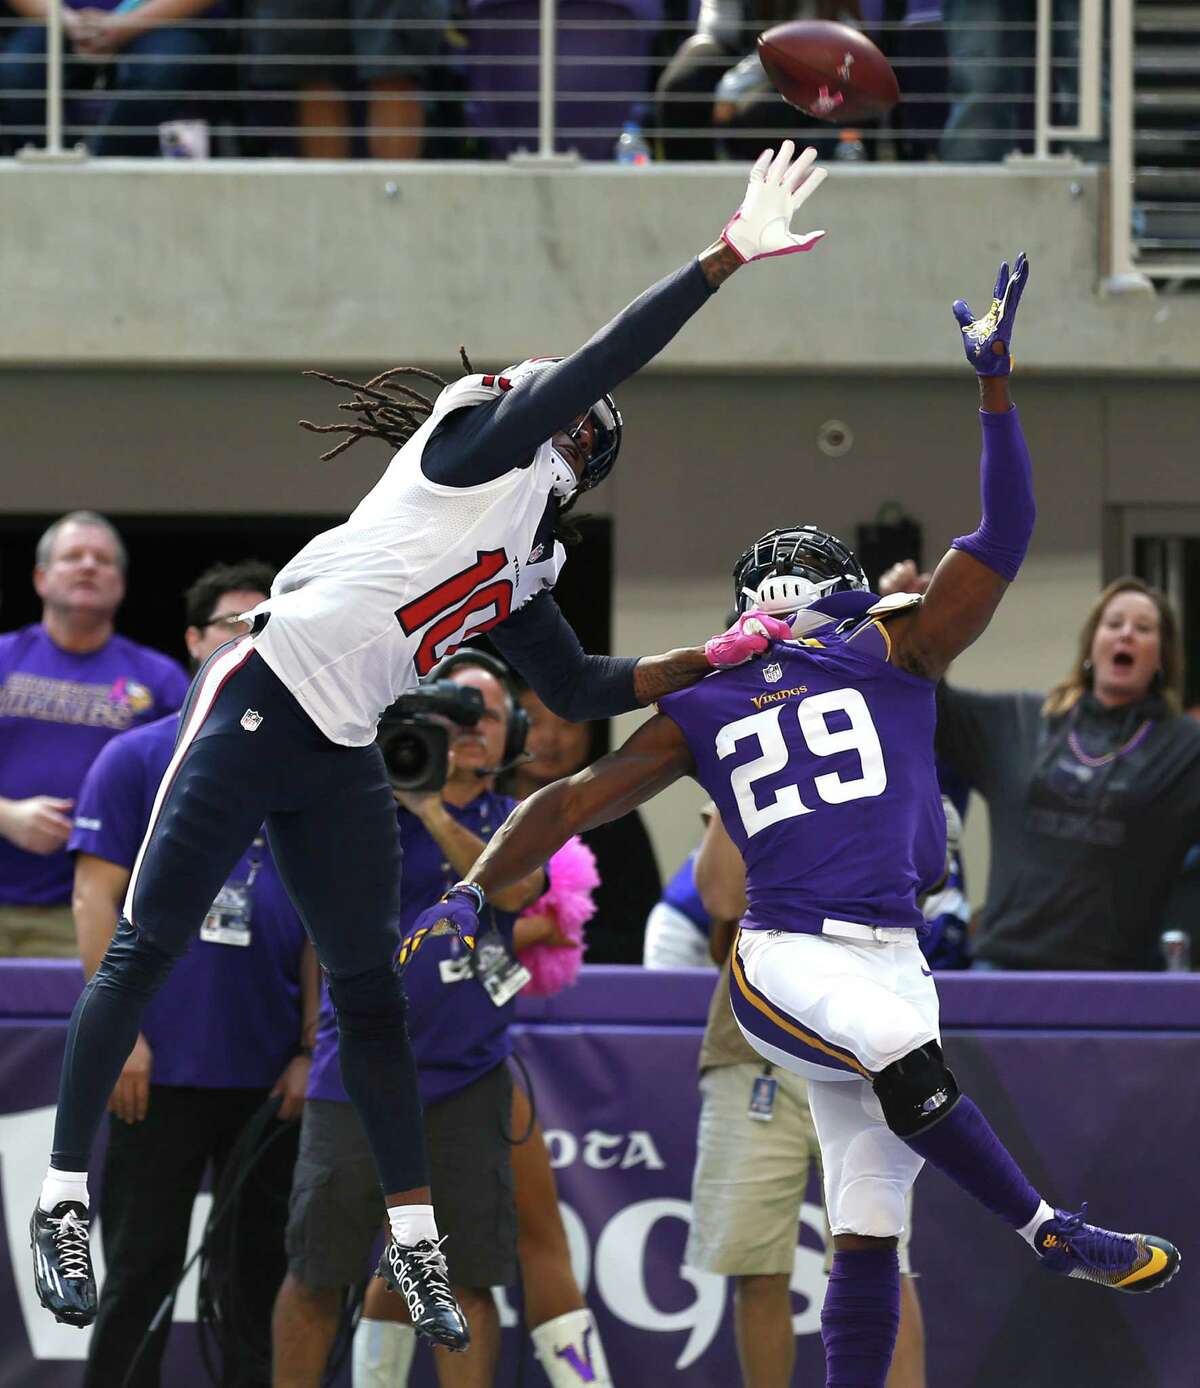 Houston Texans wide receiver DeAndre Hopkins (10) can't reach a high pass in the end zone with Minnesota Vikings cornerback Xavier Rhodes (29) defending during the second quarter of an NFL football game at U.S. Bank Stadium on Sunday, Oct. 9, 2016, in Minneapolis.